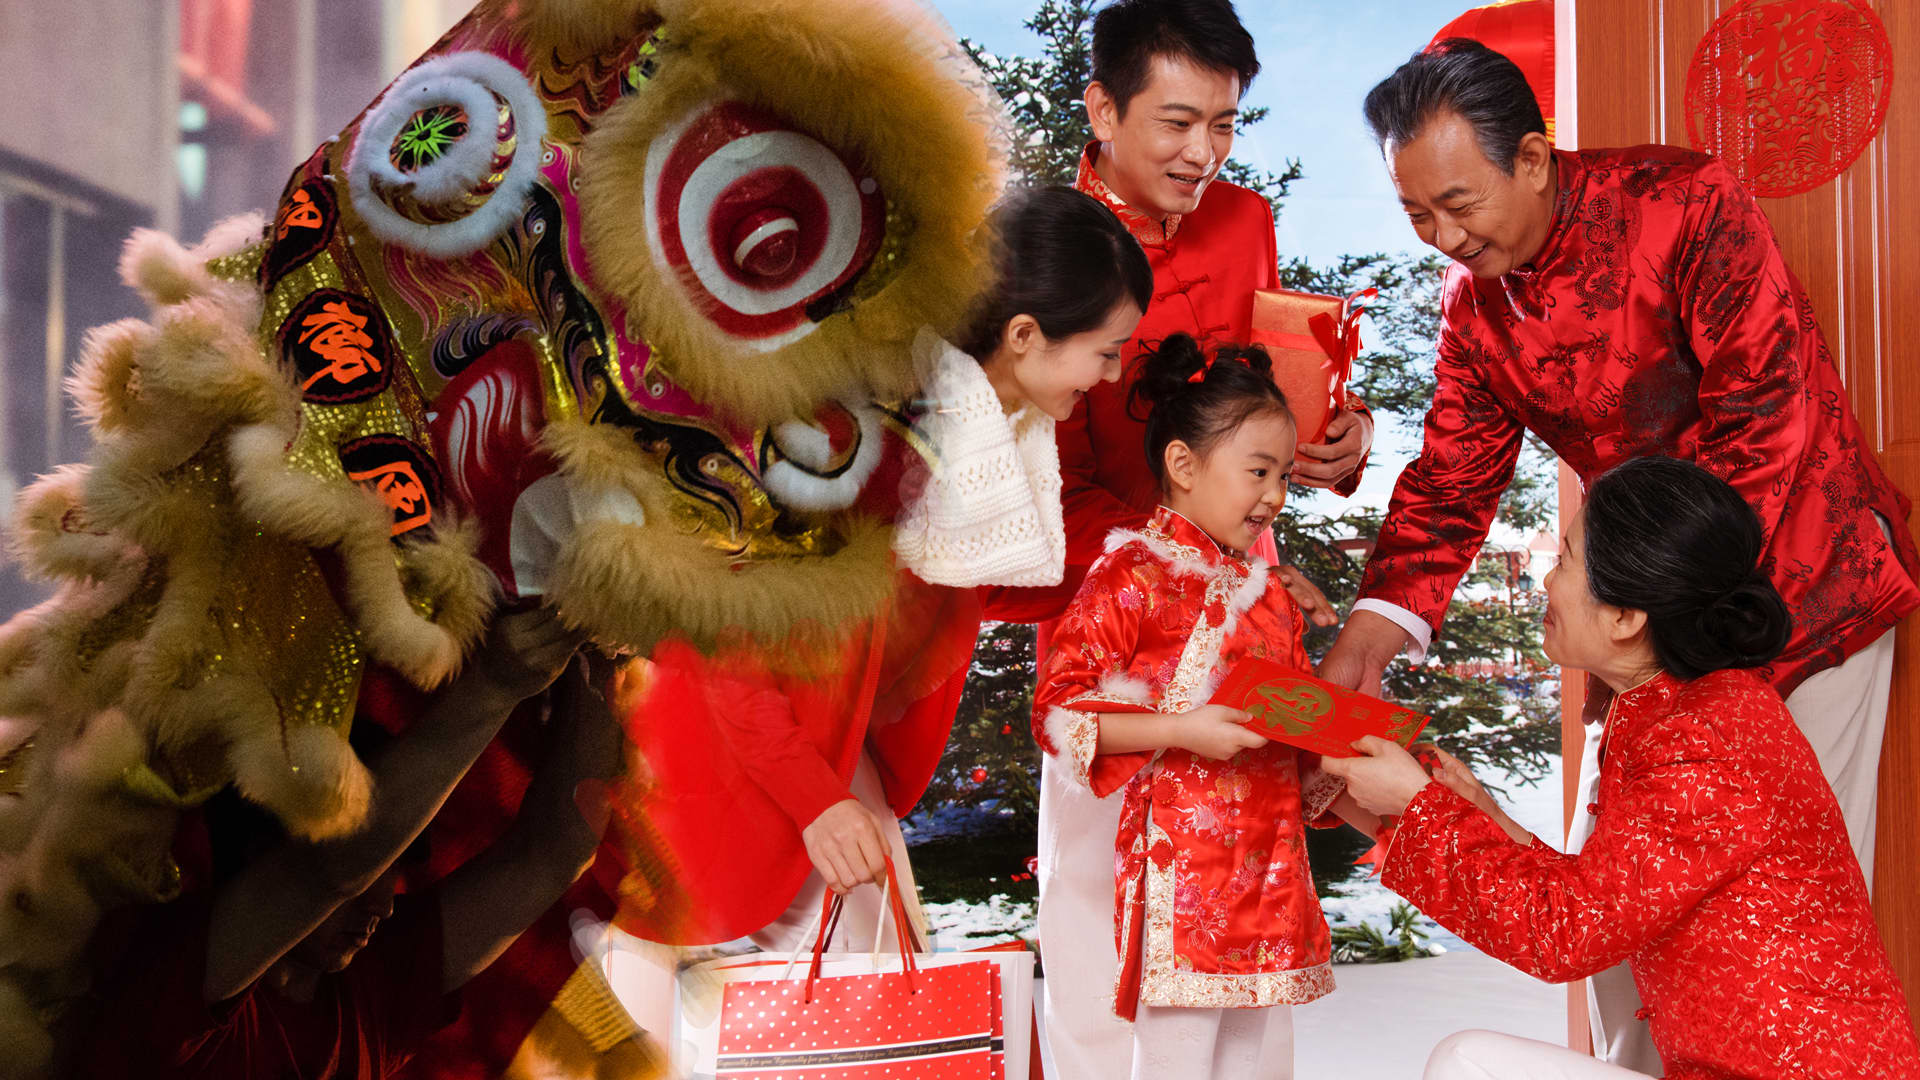 Chinese New Year means a spending spree across East Asia